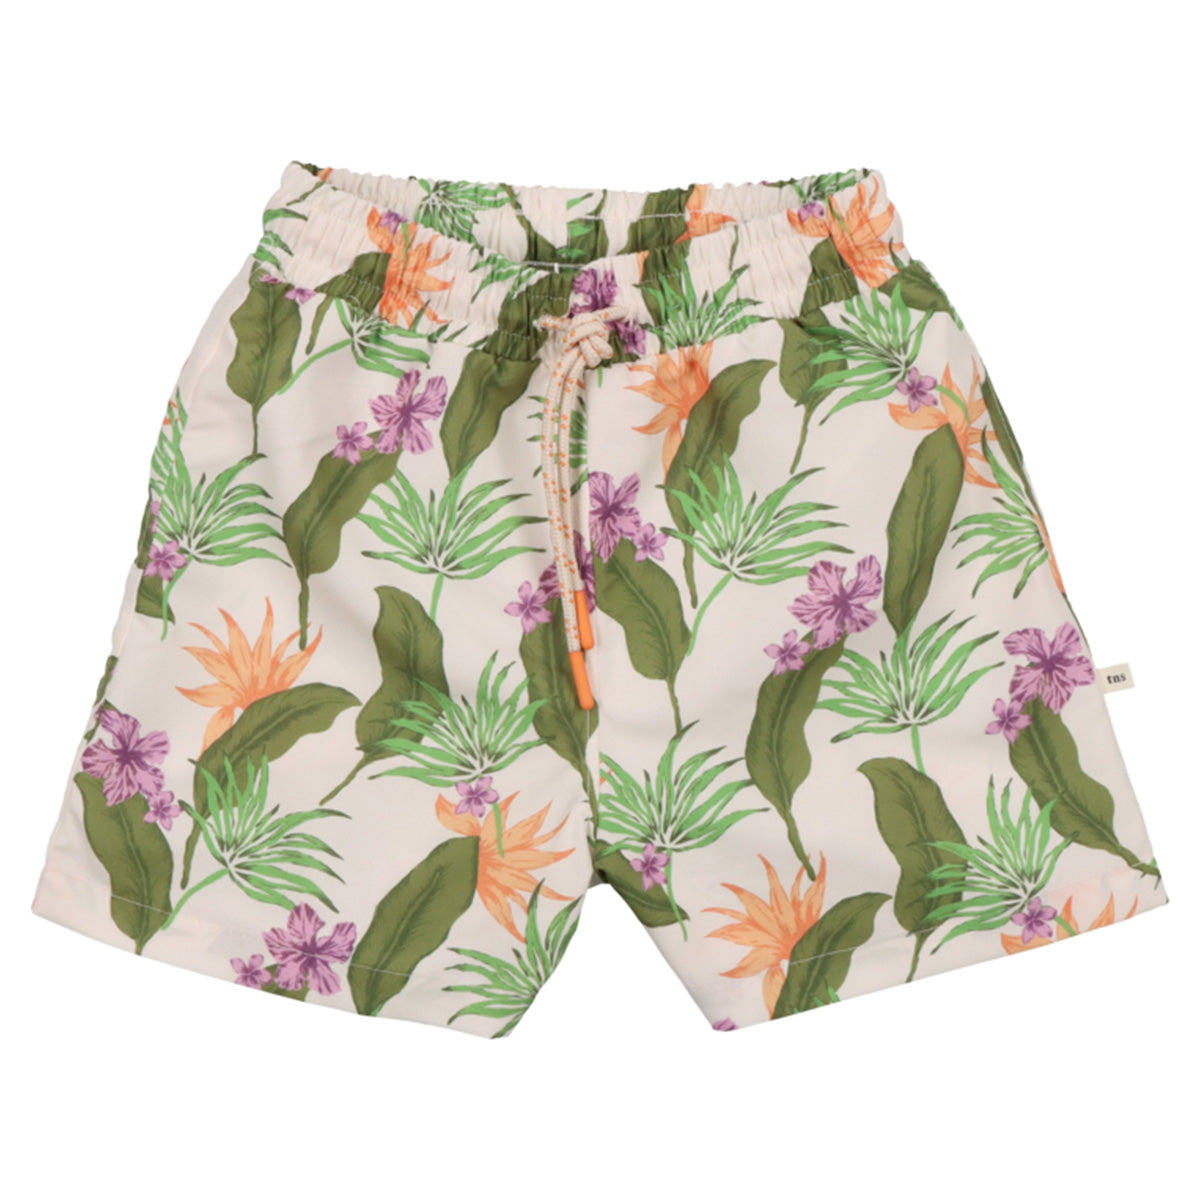 The Hills Swim Short from The New Society. Dive into style with these uniquely designed swimsuit trunks